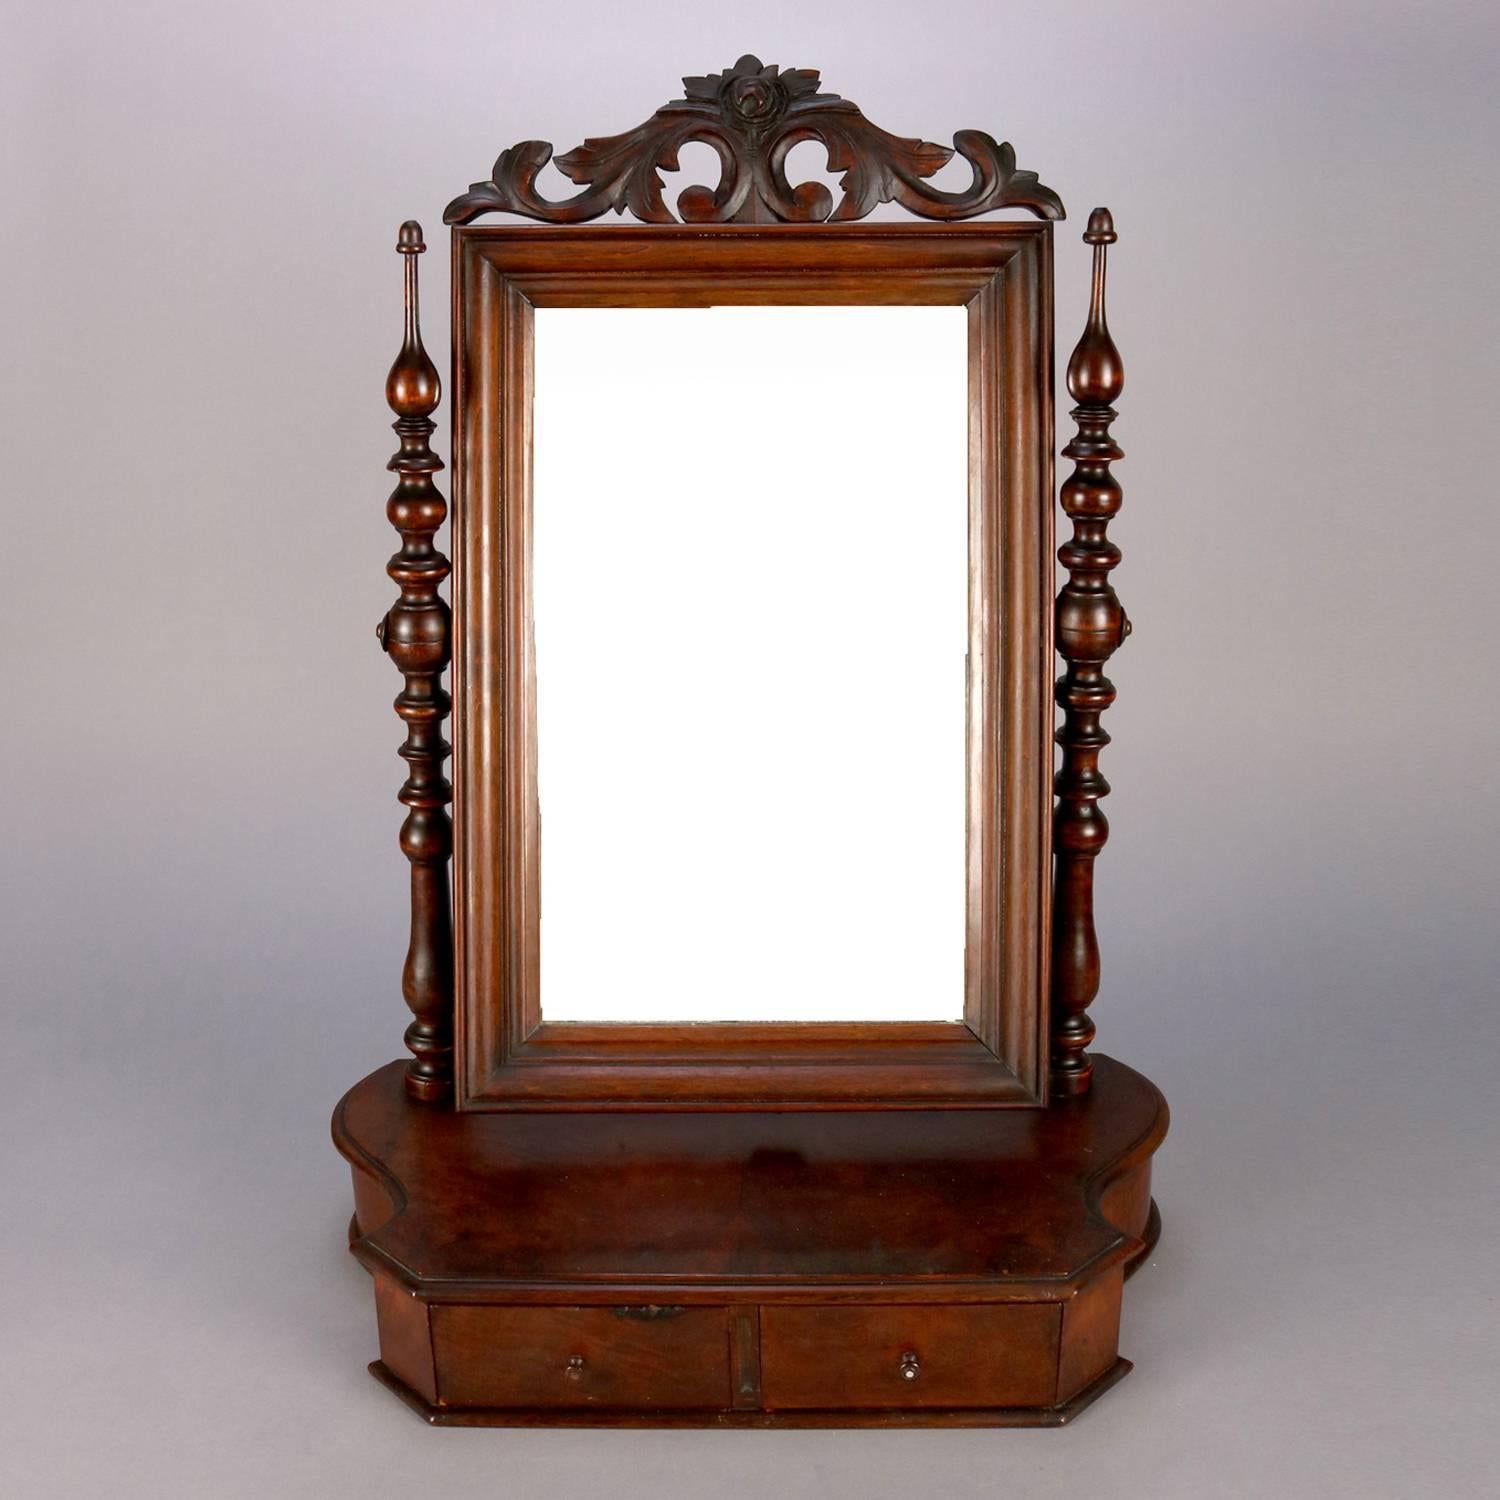 Antique William and Mary carved mahogany shaving mirror features mirror with carved foliate crest flanked by turned supports and seated on shaped case with two drawers, circa 1830

***DELIVERY NOTICE – Due to COVID-19 we are employing NO-CONTACT